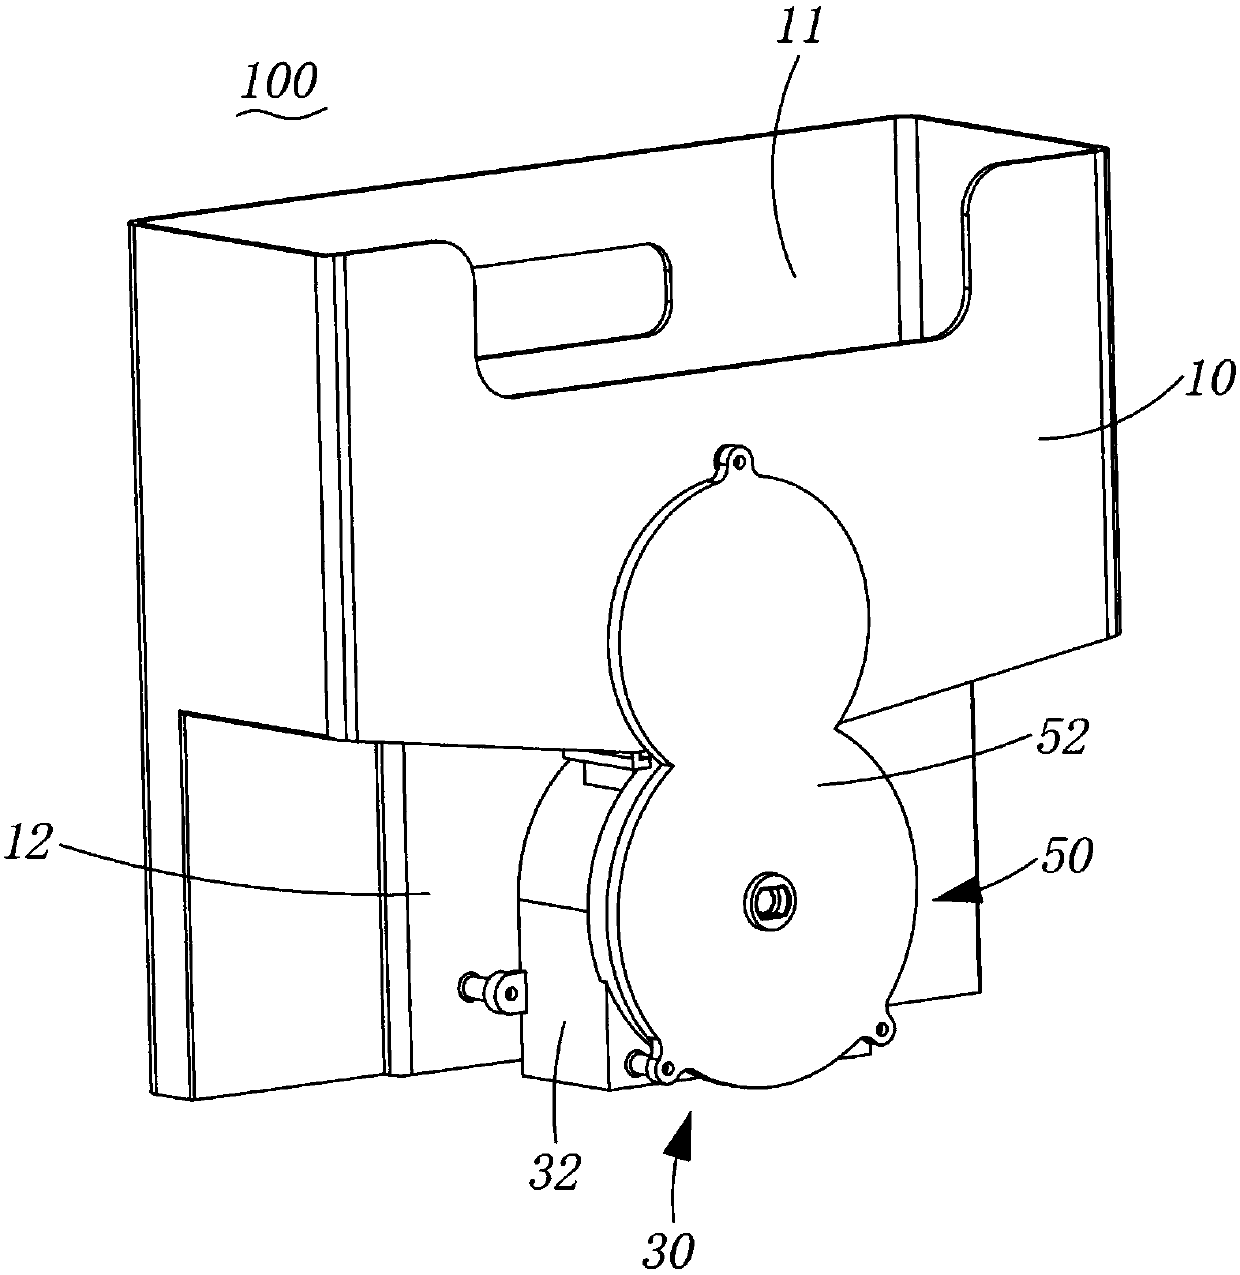 Ice crushing device and refrigerator